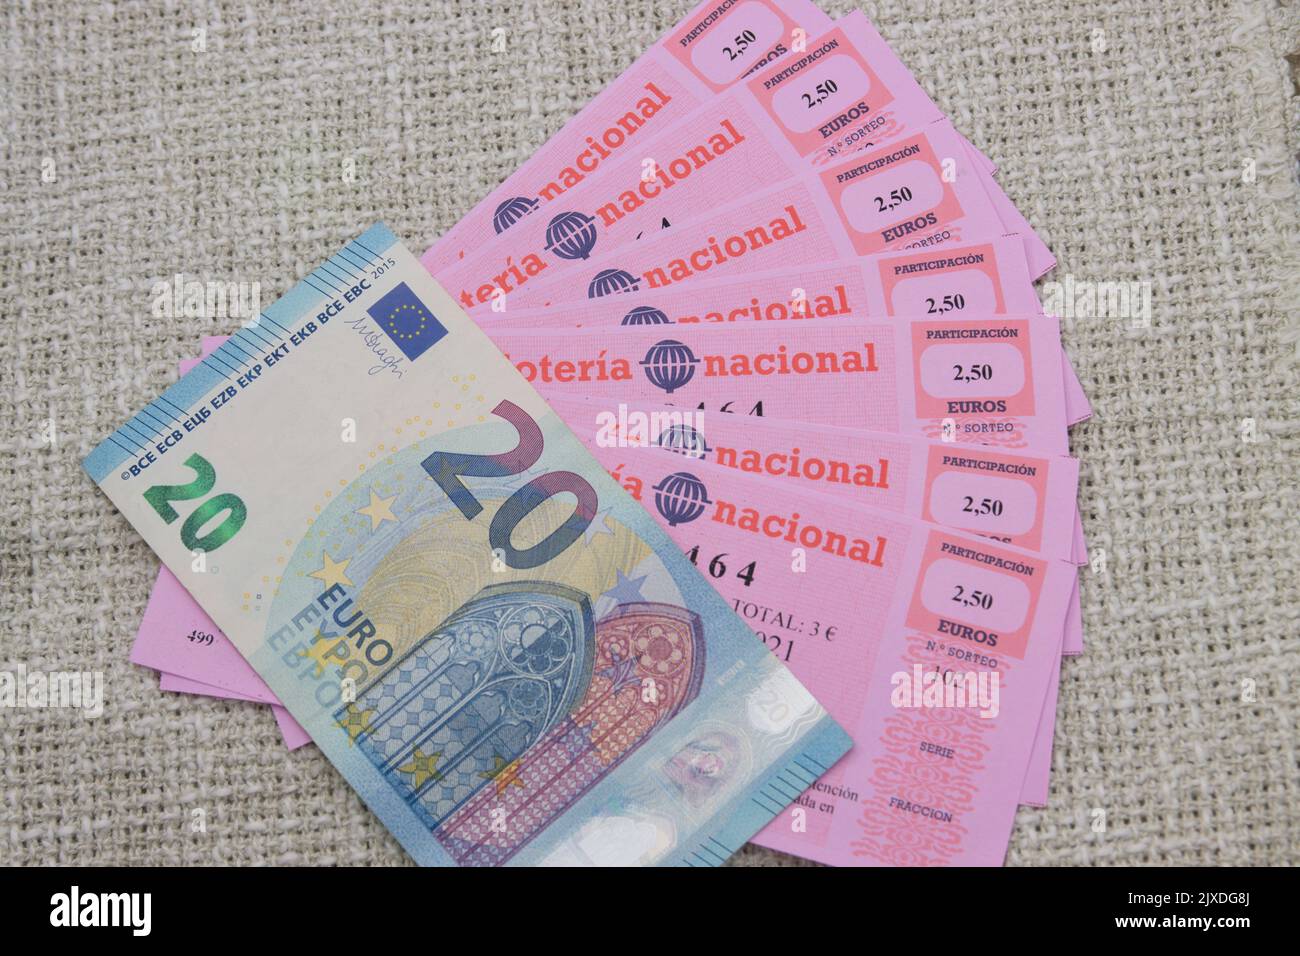 Participations equivalent to a Spanish national lottery ticket worth €20 together with a €20 bill on a neutral background Stock Photo